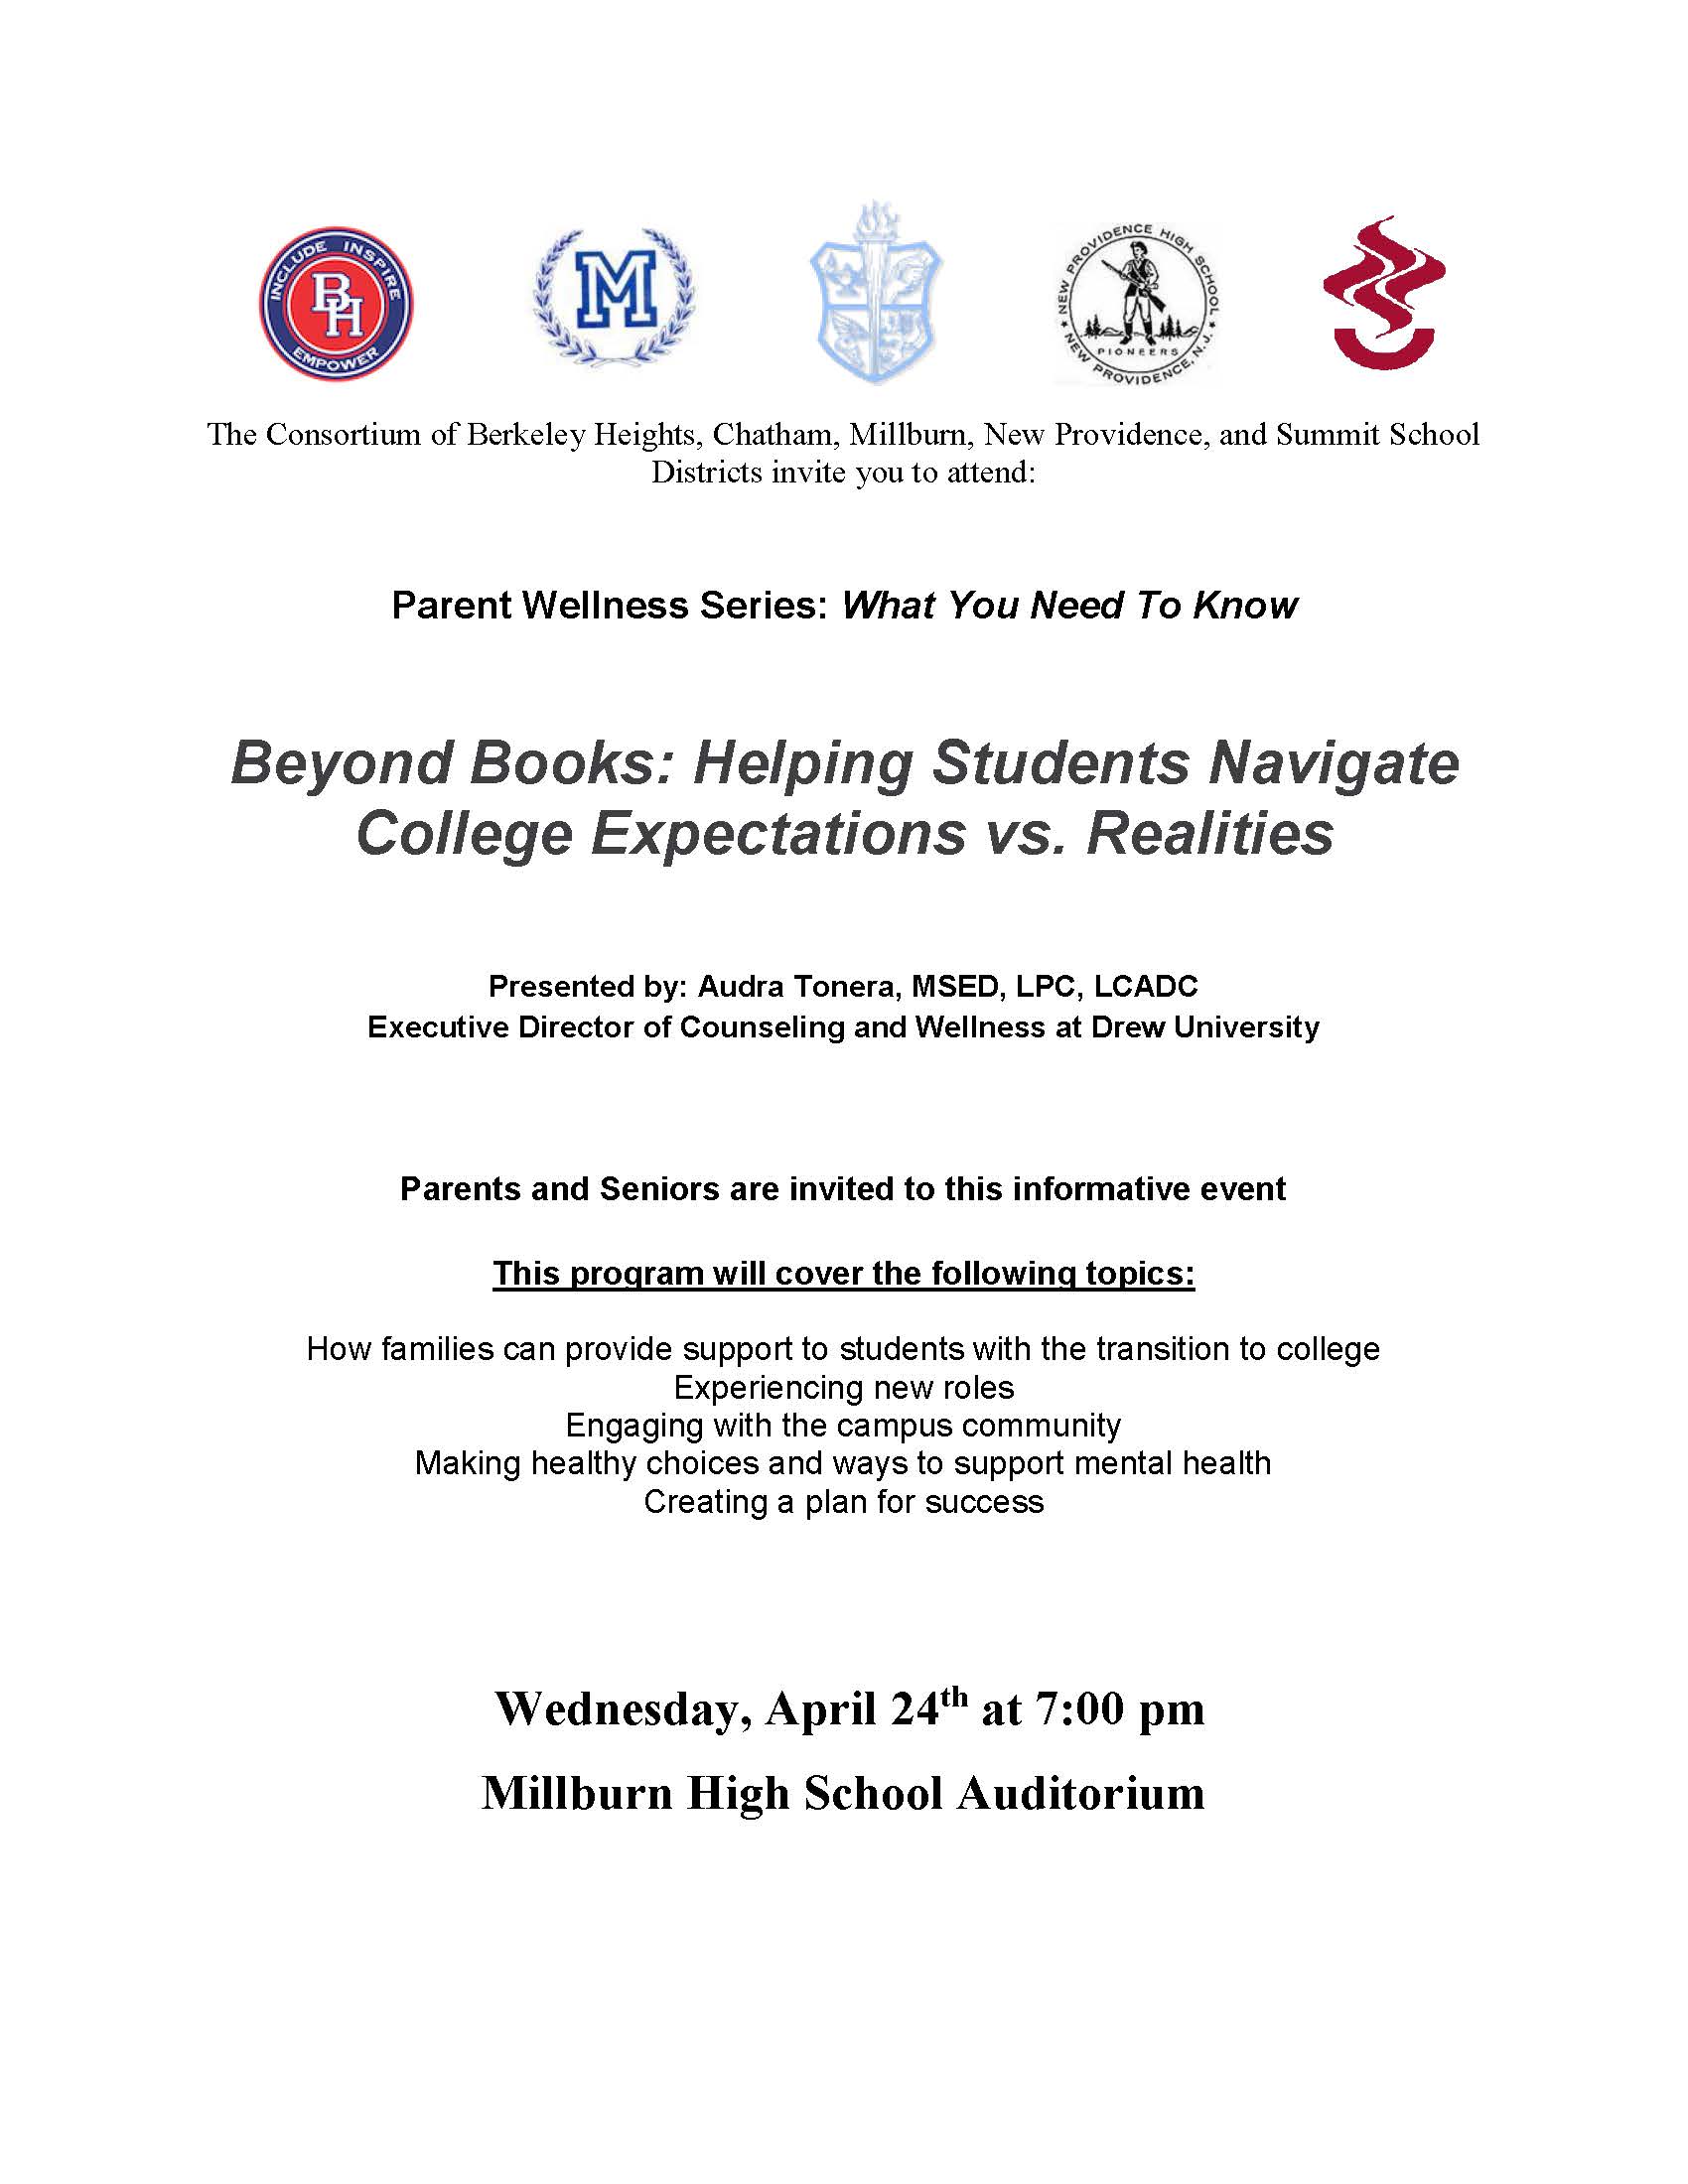 The Consortium of Berkeley Heights, Chatham, Millburn, New Providence and Summit School Districts invite you to attend Parent Wellness Series: What You Need to Know. Beyond Books: Helping Sudents Navigate Colege Expectations vs. Realities.  Presented by Audra Tonera Executive Director of Counseling and Wellness at Dre University. Wednesday April 24th at 7:00 PM Millburn High School Auditorium